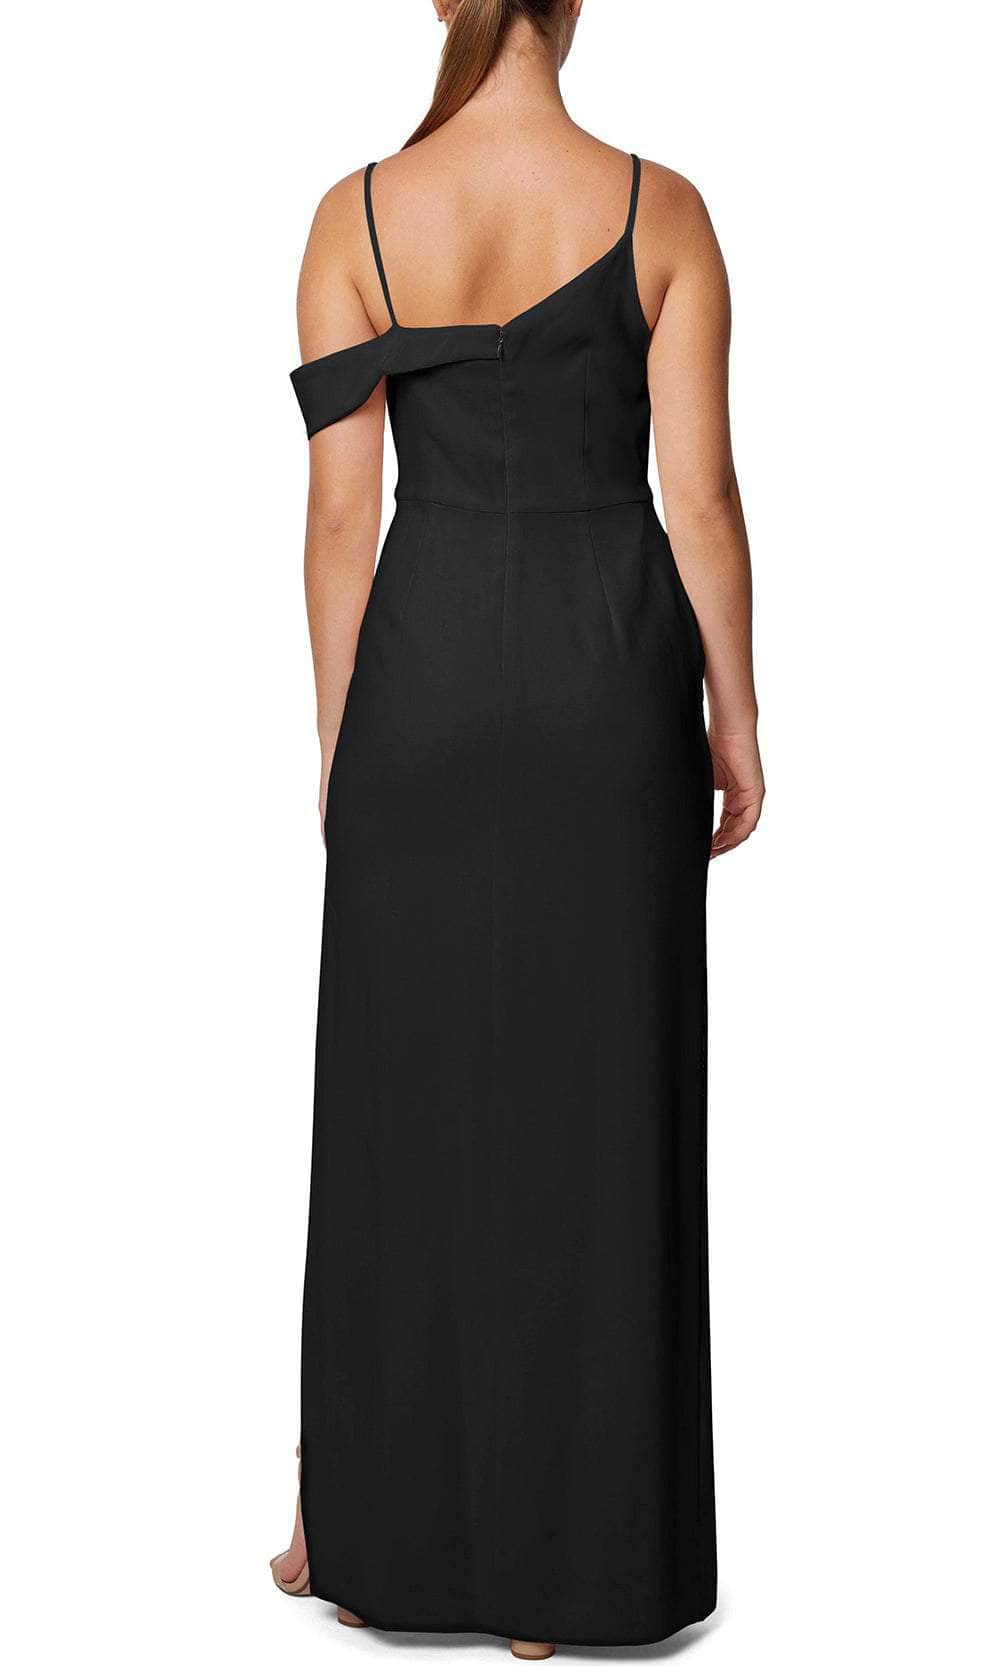 Laundry, Laundry HQ07W94 - Spaghetti Strap Crepe Evening Gown